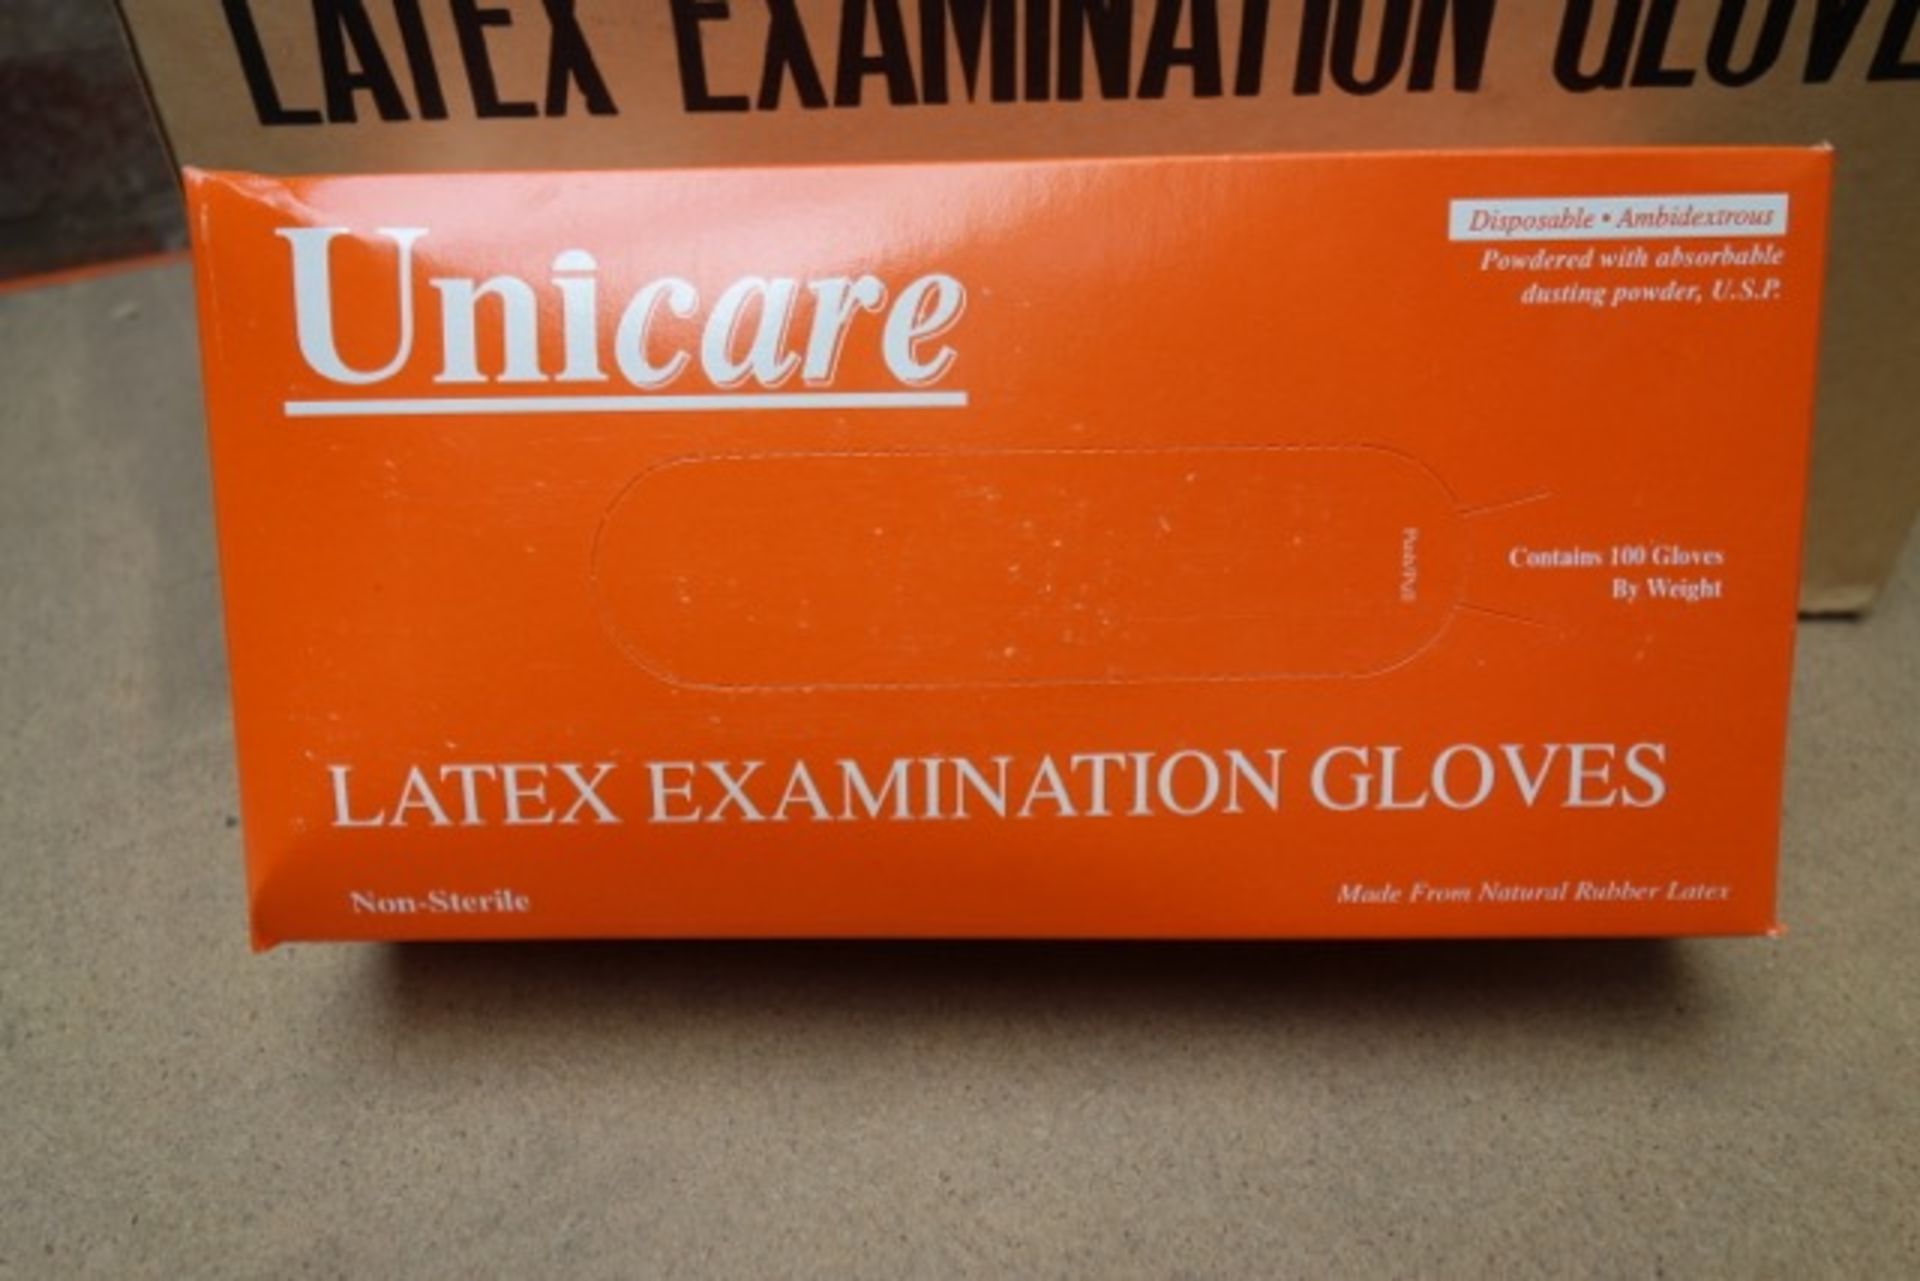 100 boxes of 100 Unicare Latex Powdered Examination Gloves - Non-Sterile - Size: Extra Small - Total